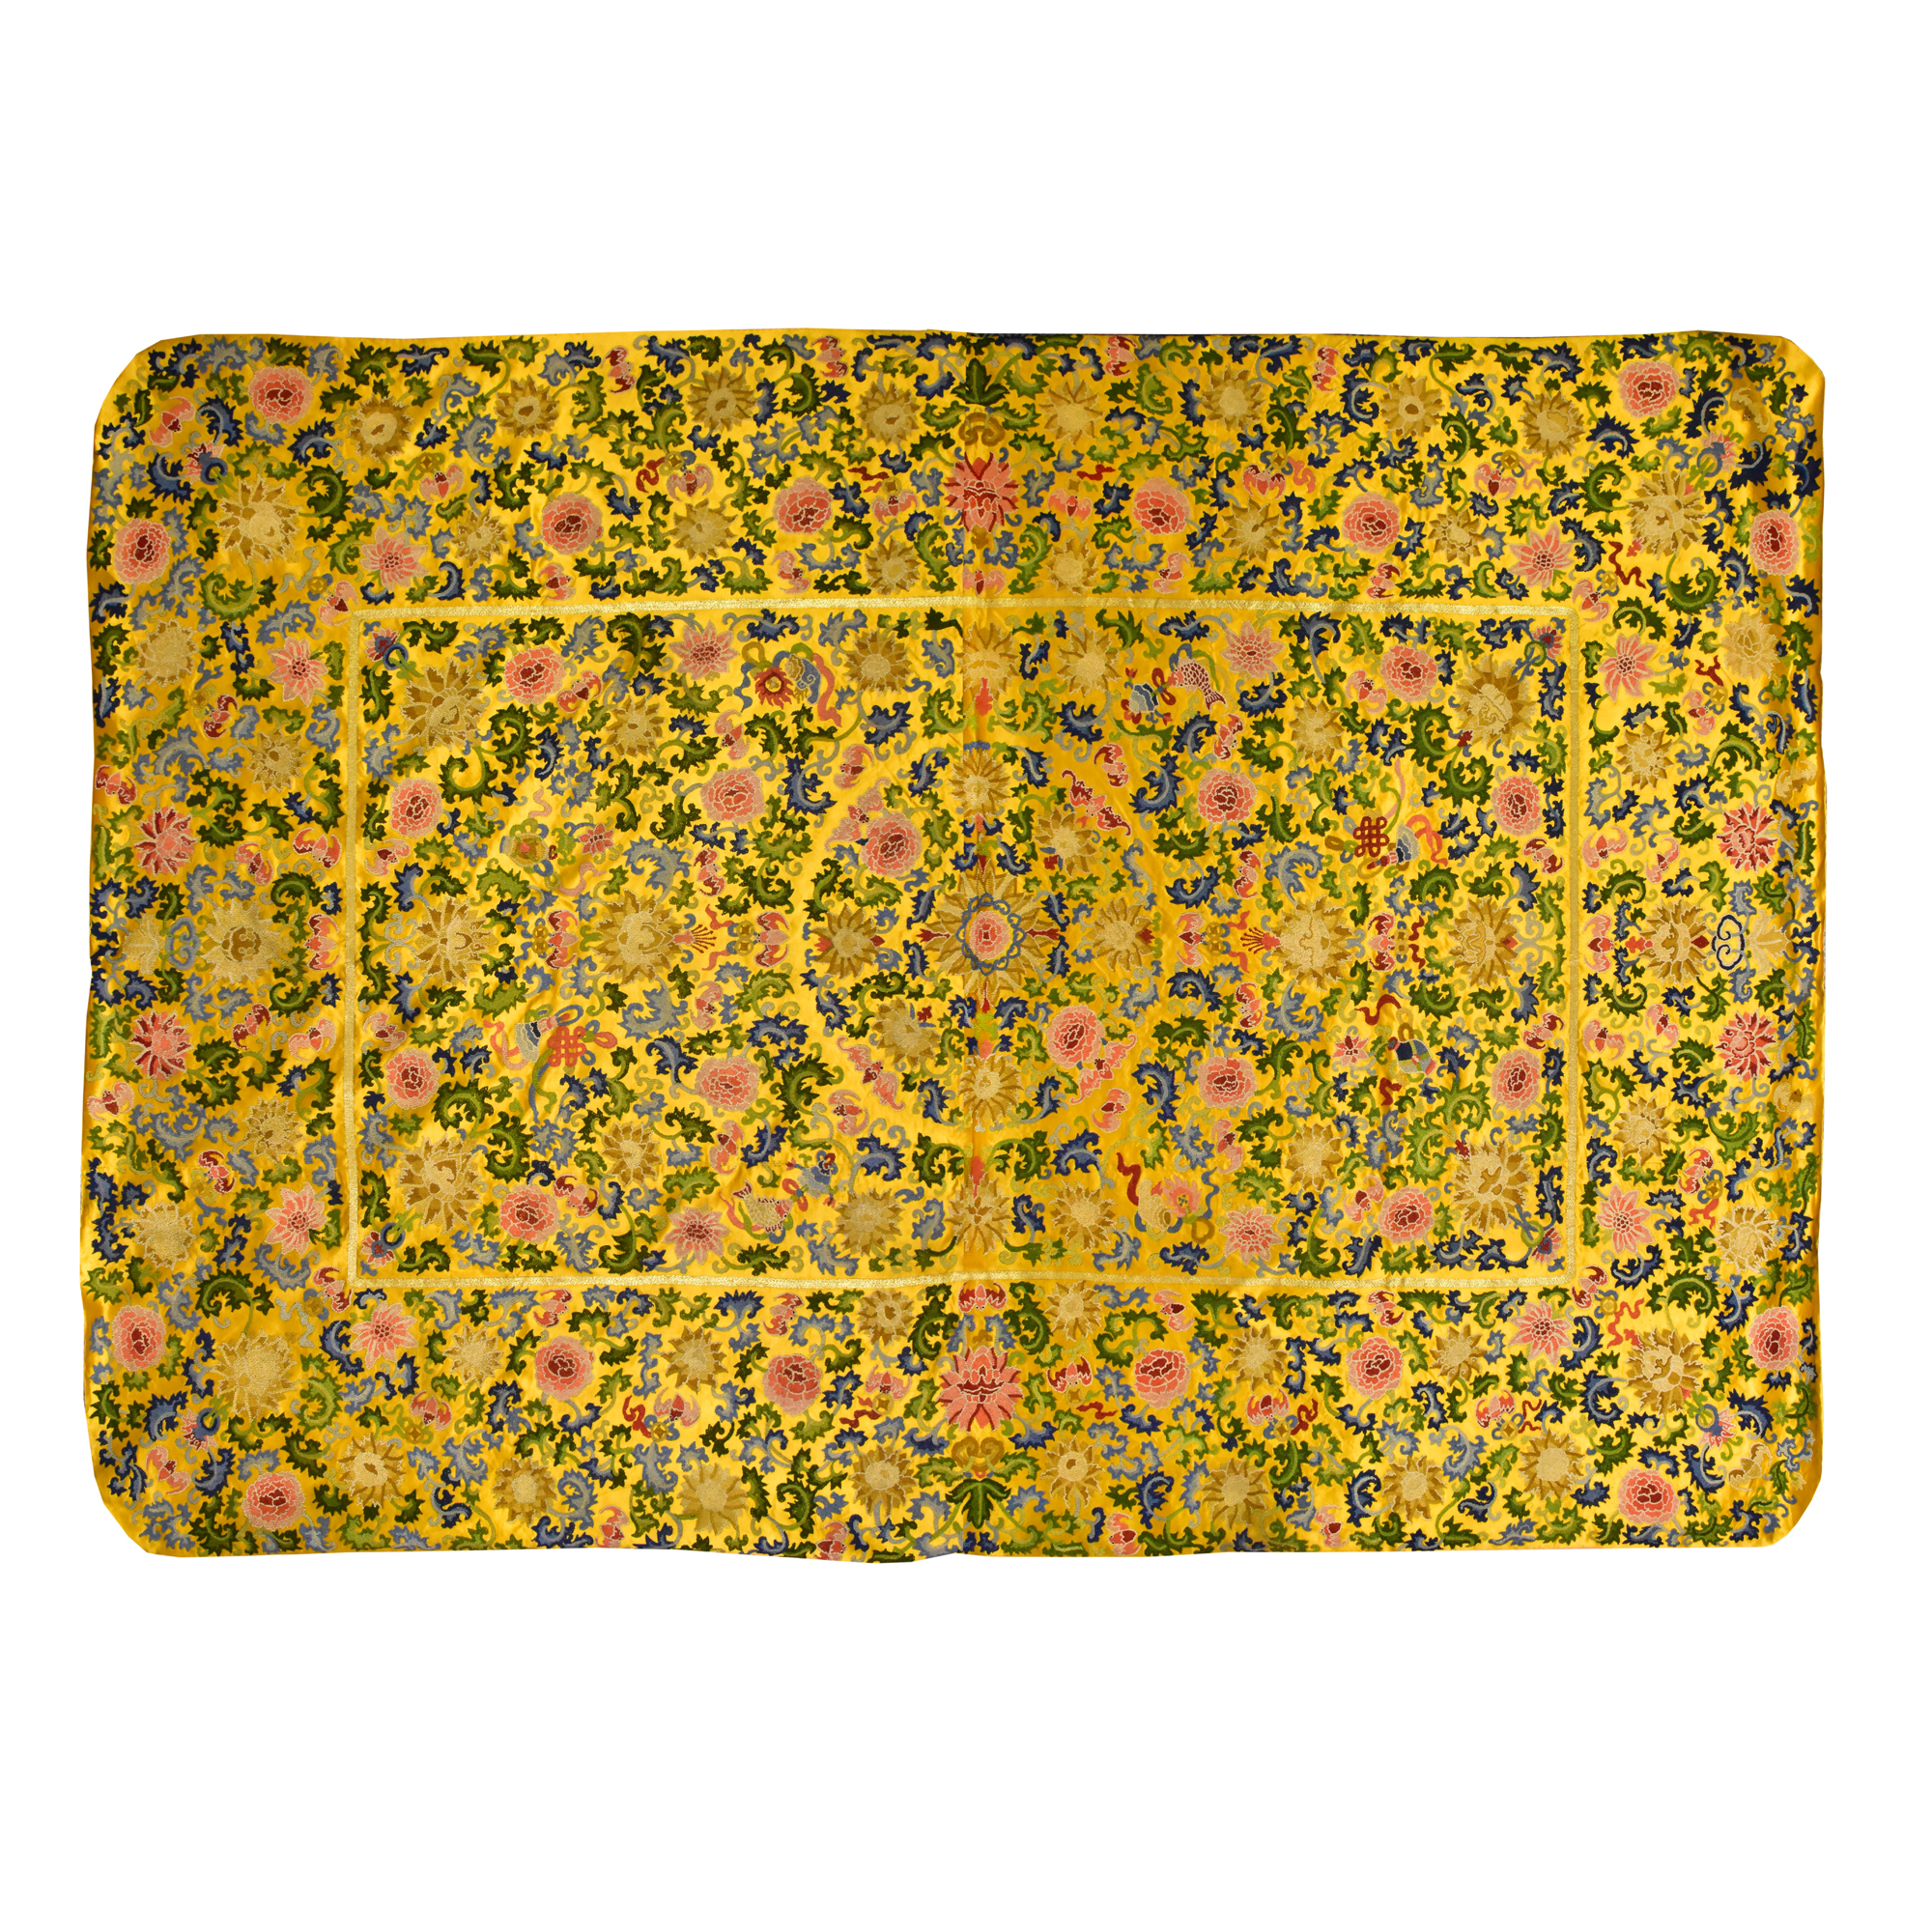 A LARGE CHINESE YELLOW-GROUND BAJIXIANG SILK PANEL, QING DYNASTY, 19TH CENTURY